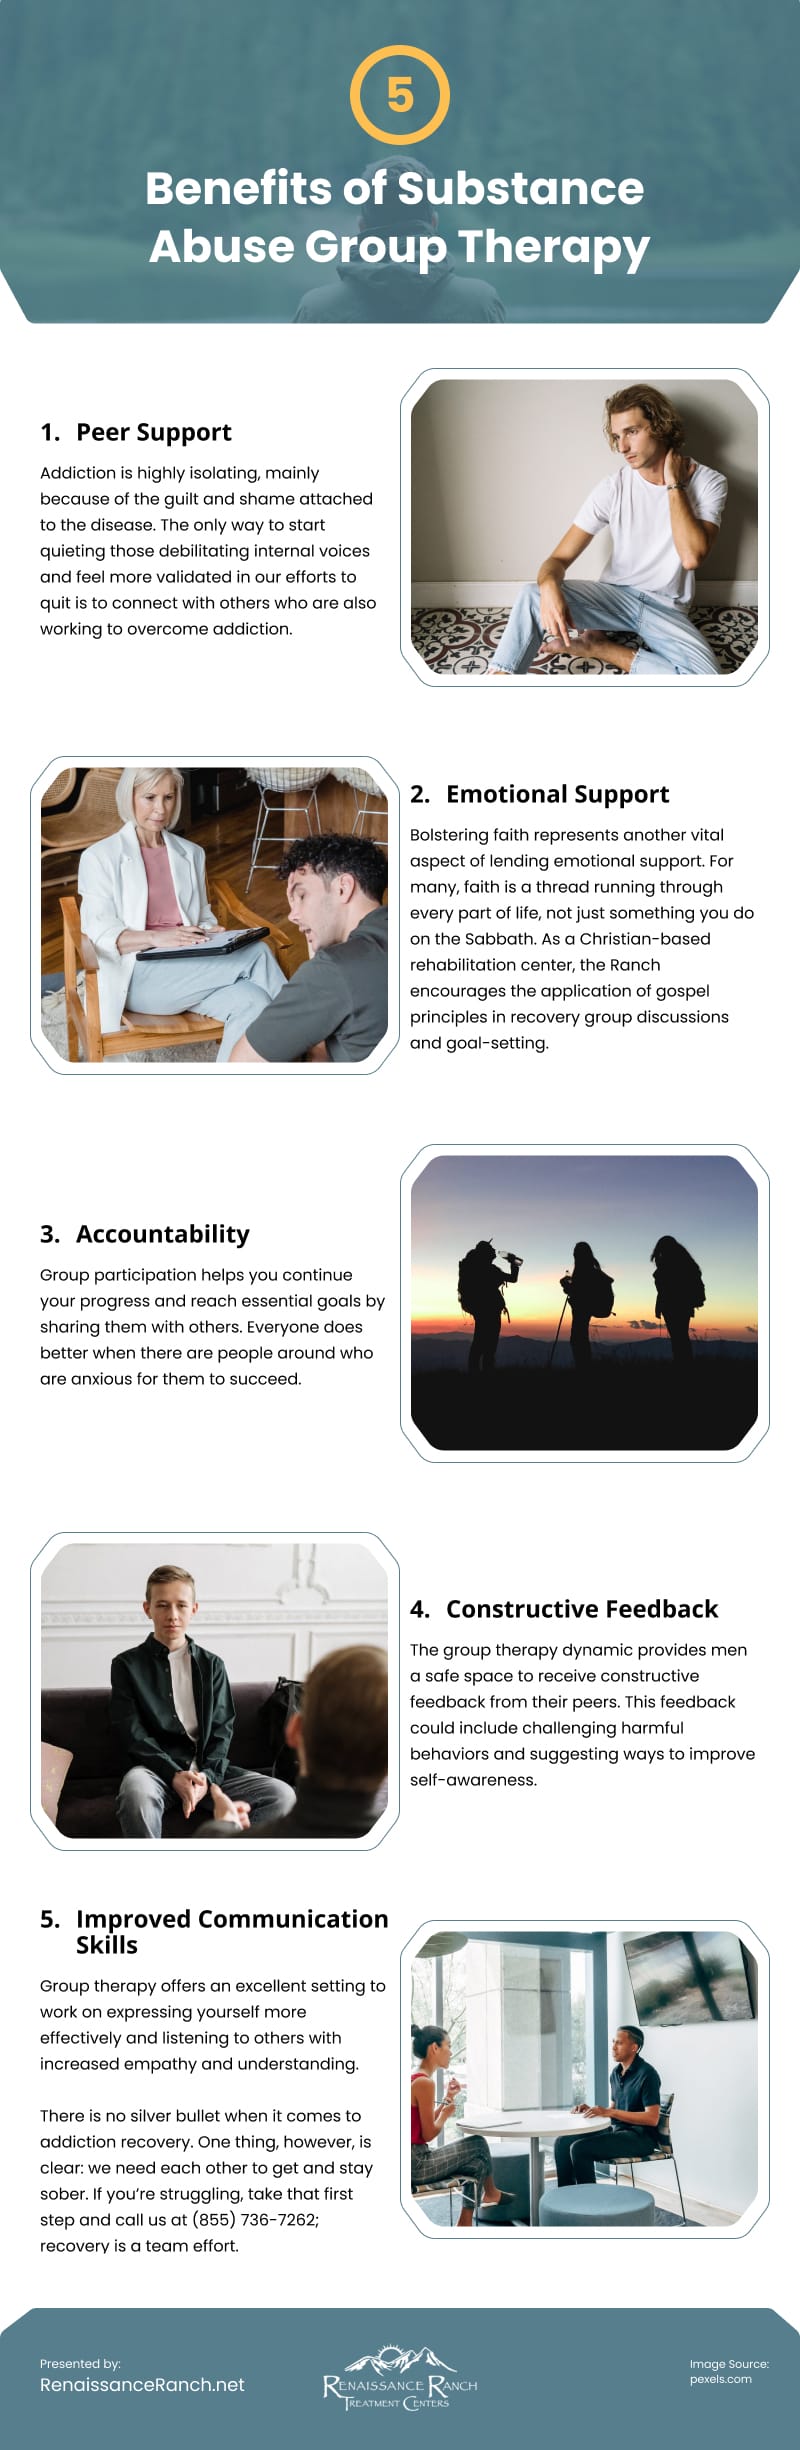 5 Benefits of Substance Abuse Group Therapy Infographic